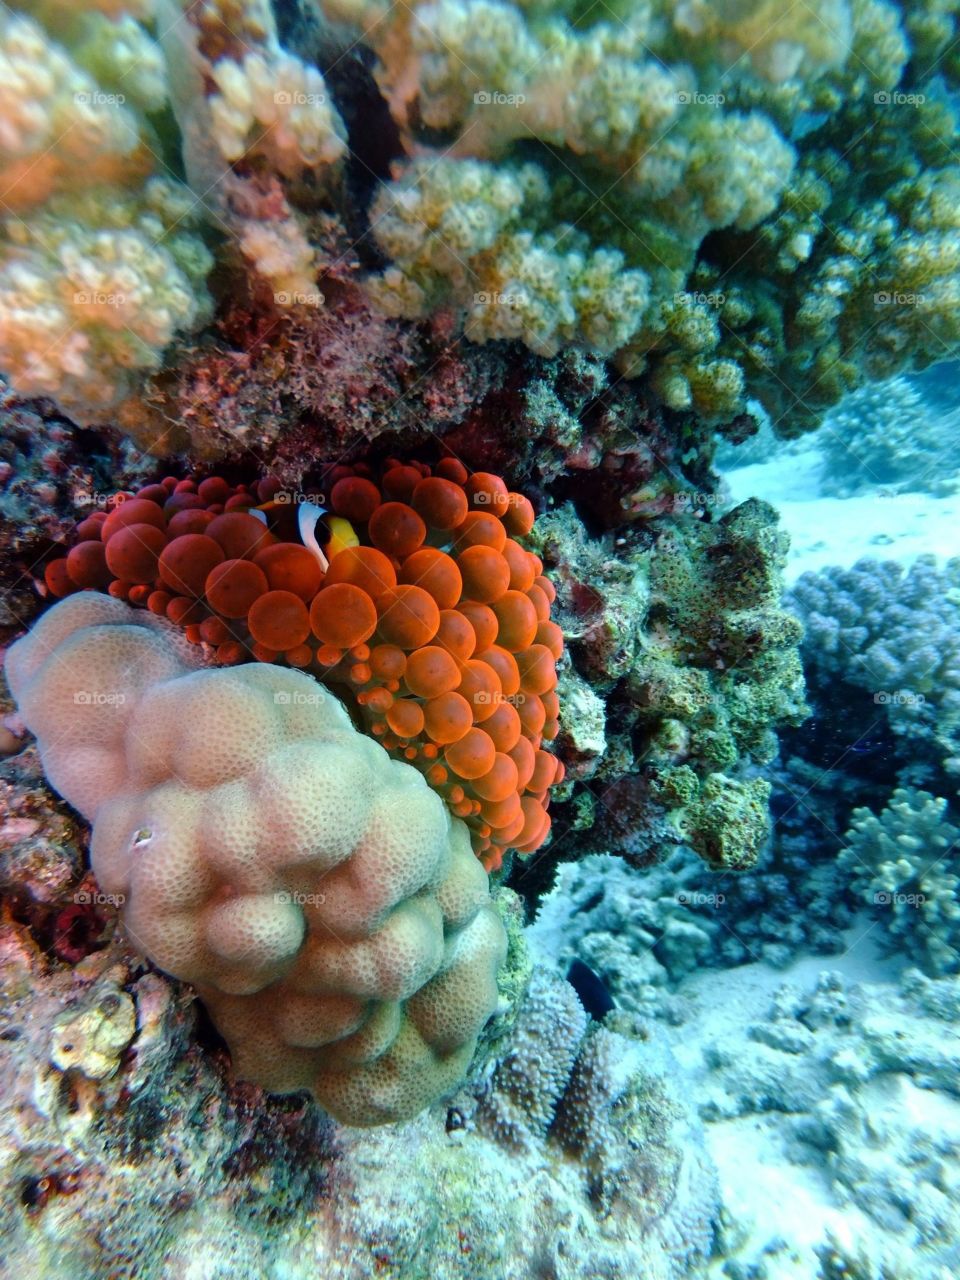 Clown fish protecting her eggs